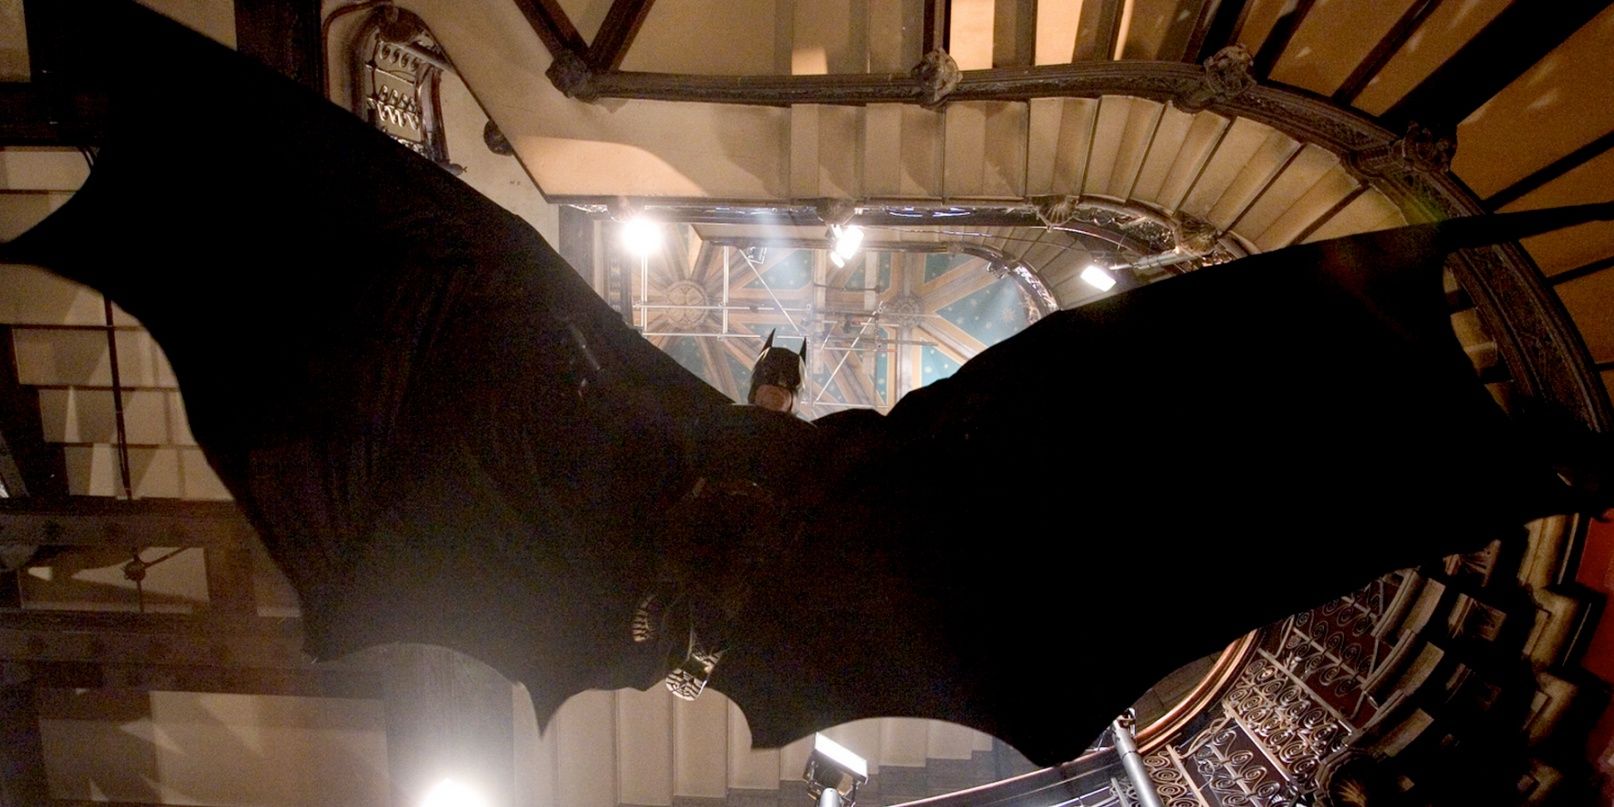 Batman soars down stairwell with his cape making the shape of a bat in Batman Begins